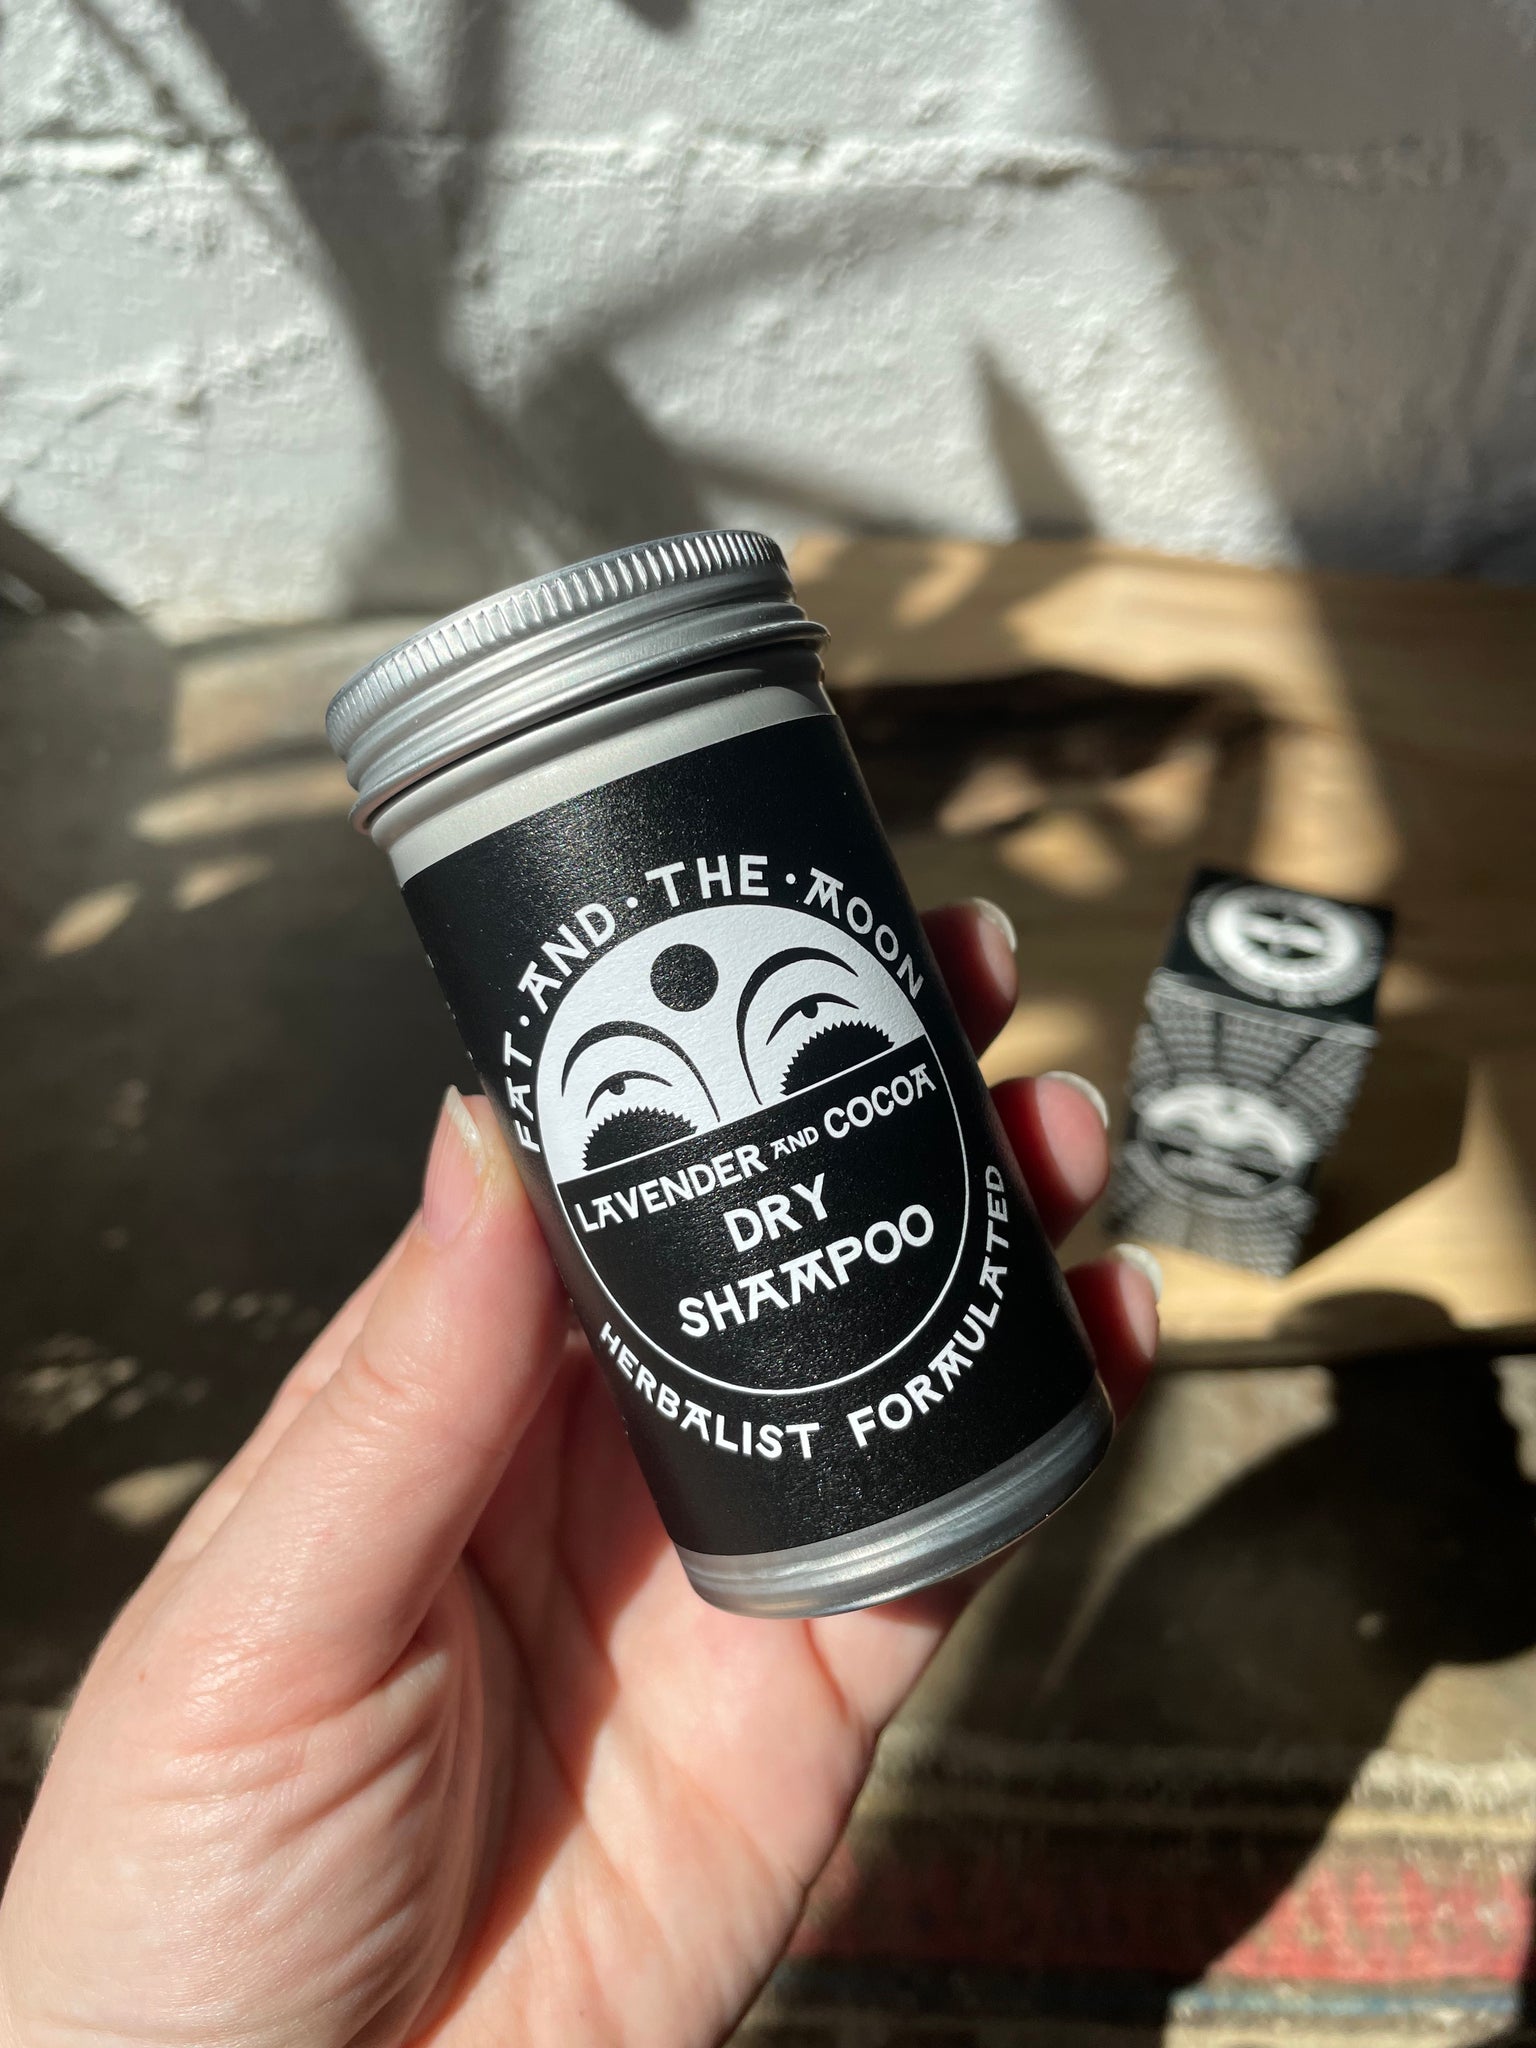 Lavender & Cocoa Dry Shampoo by Fat and The Moon